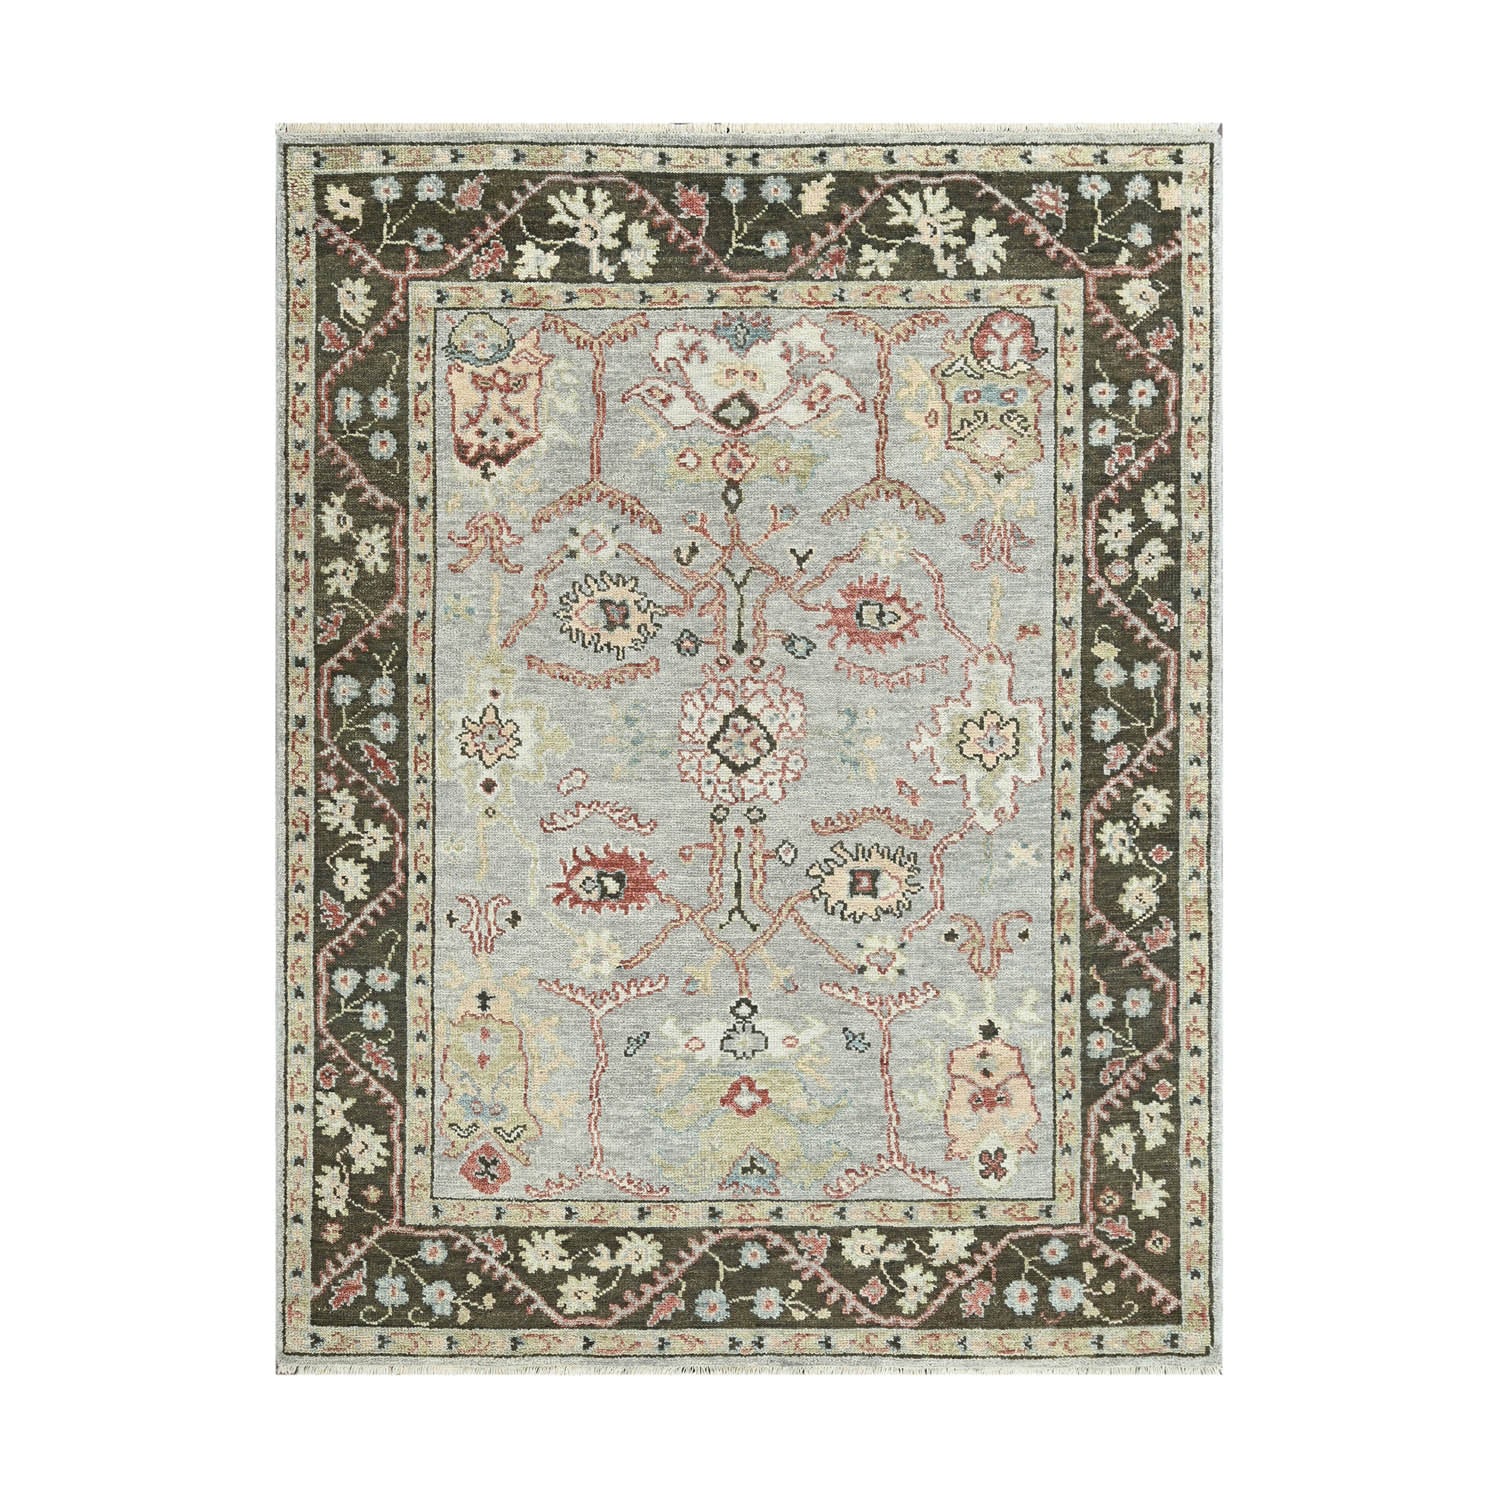 Swell LoomBloom Multi Size Moss Handcrafted Oushak Wool Area Rug with Traditional Design